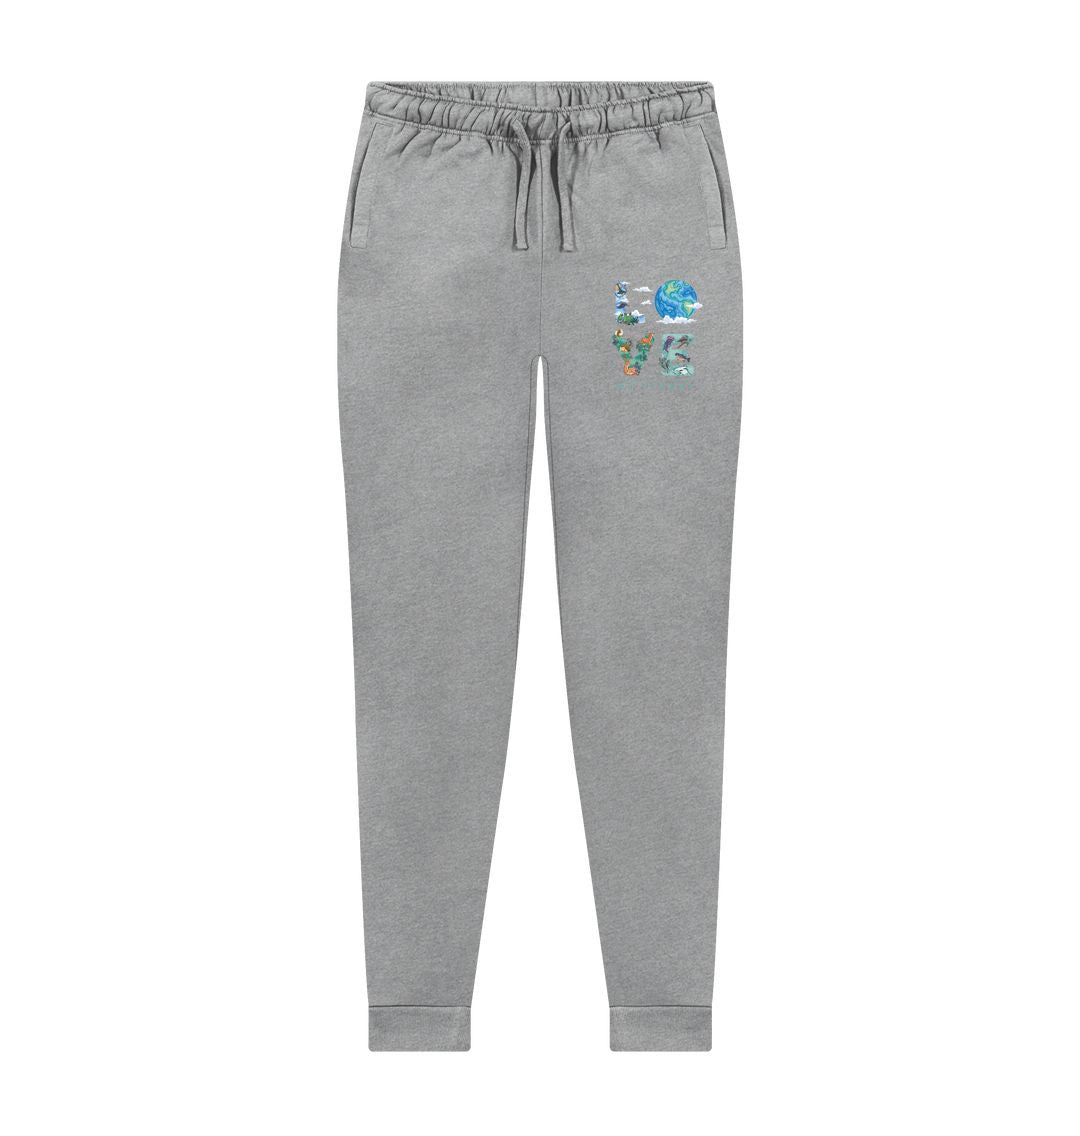 Athletic Grey Love My Planet Women's Joggers